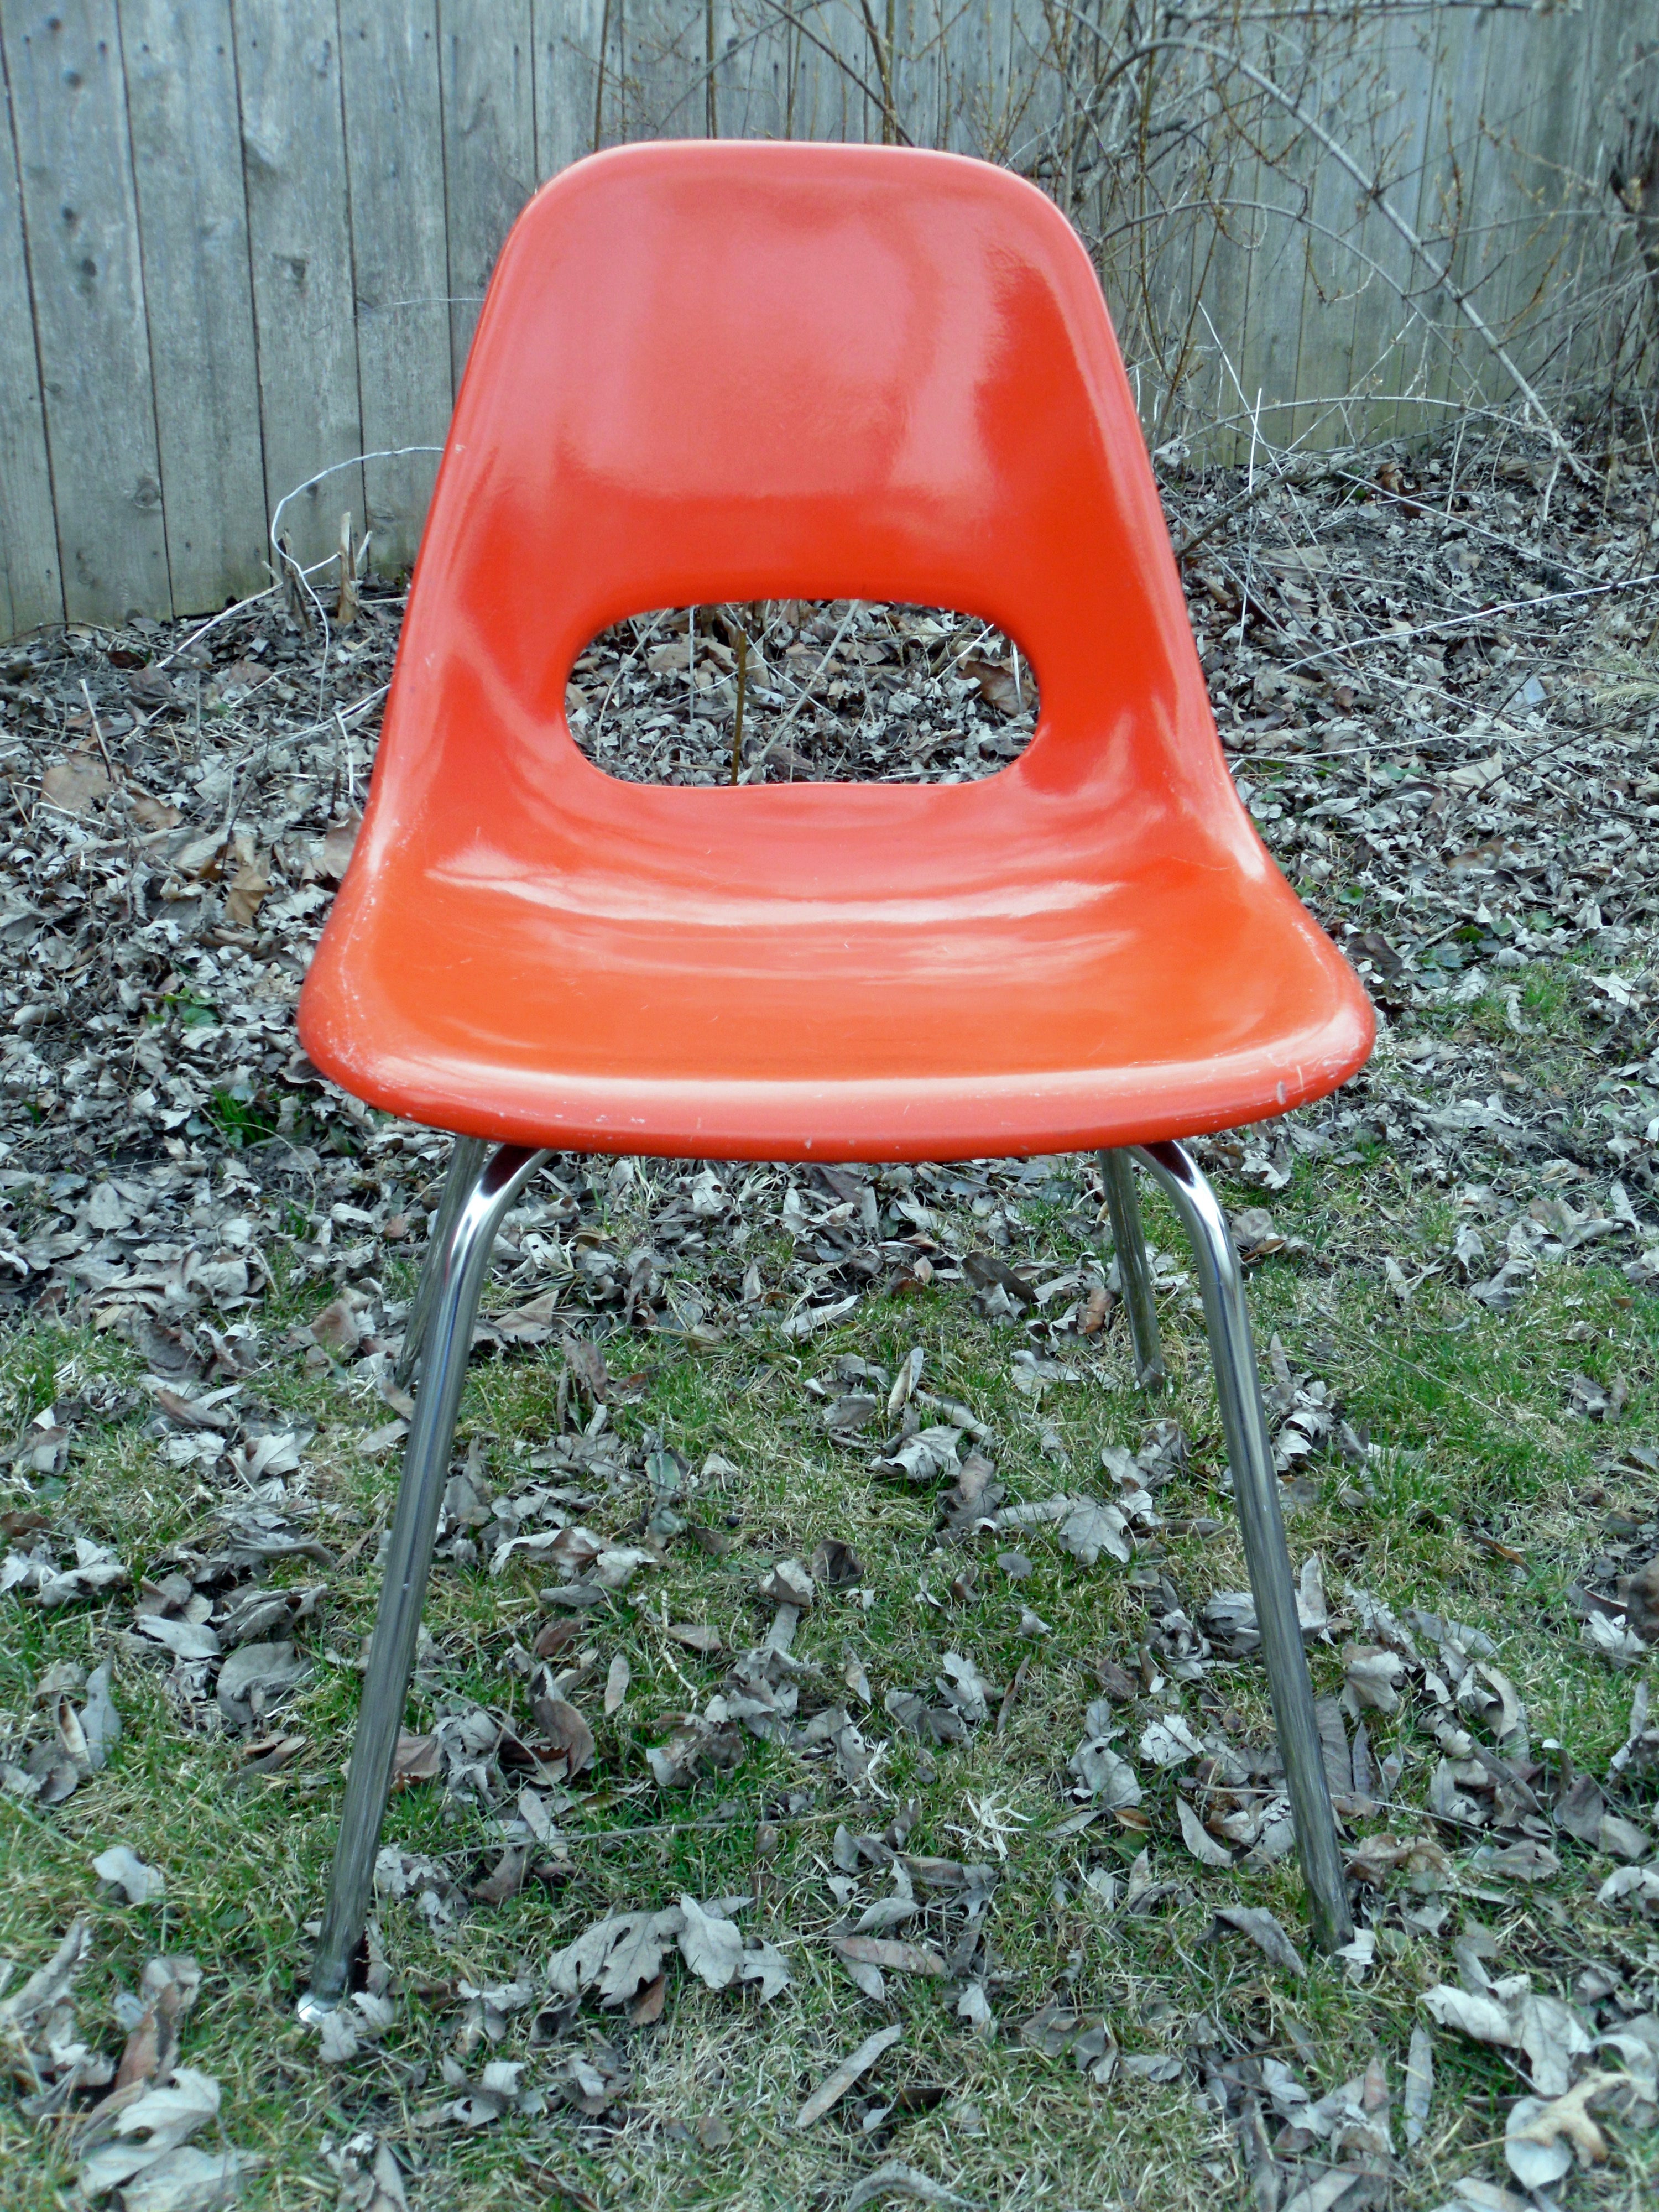 Mid-Century Fiberglass Chair, adult size; 3 available